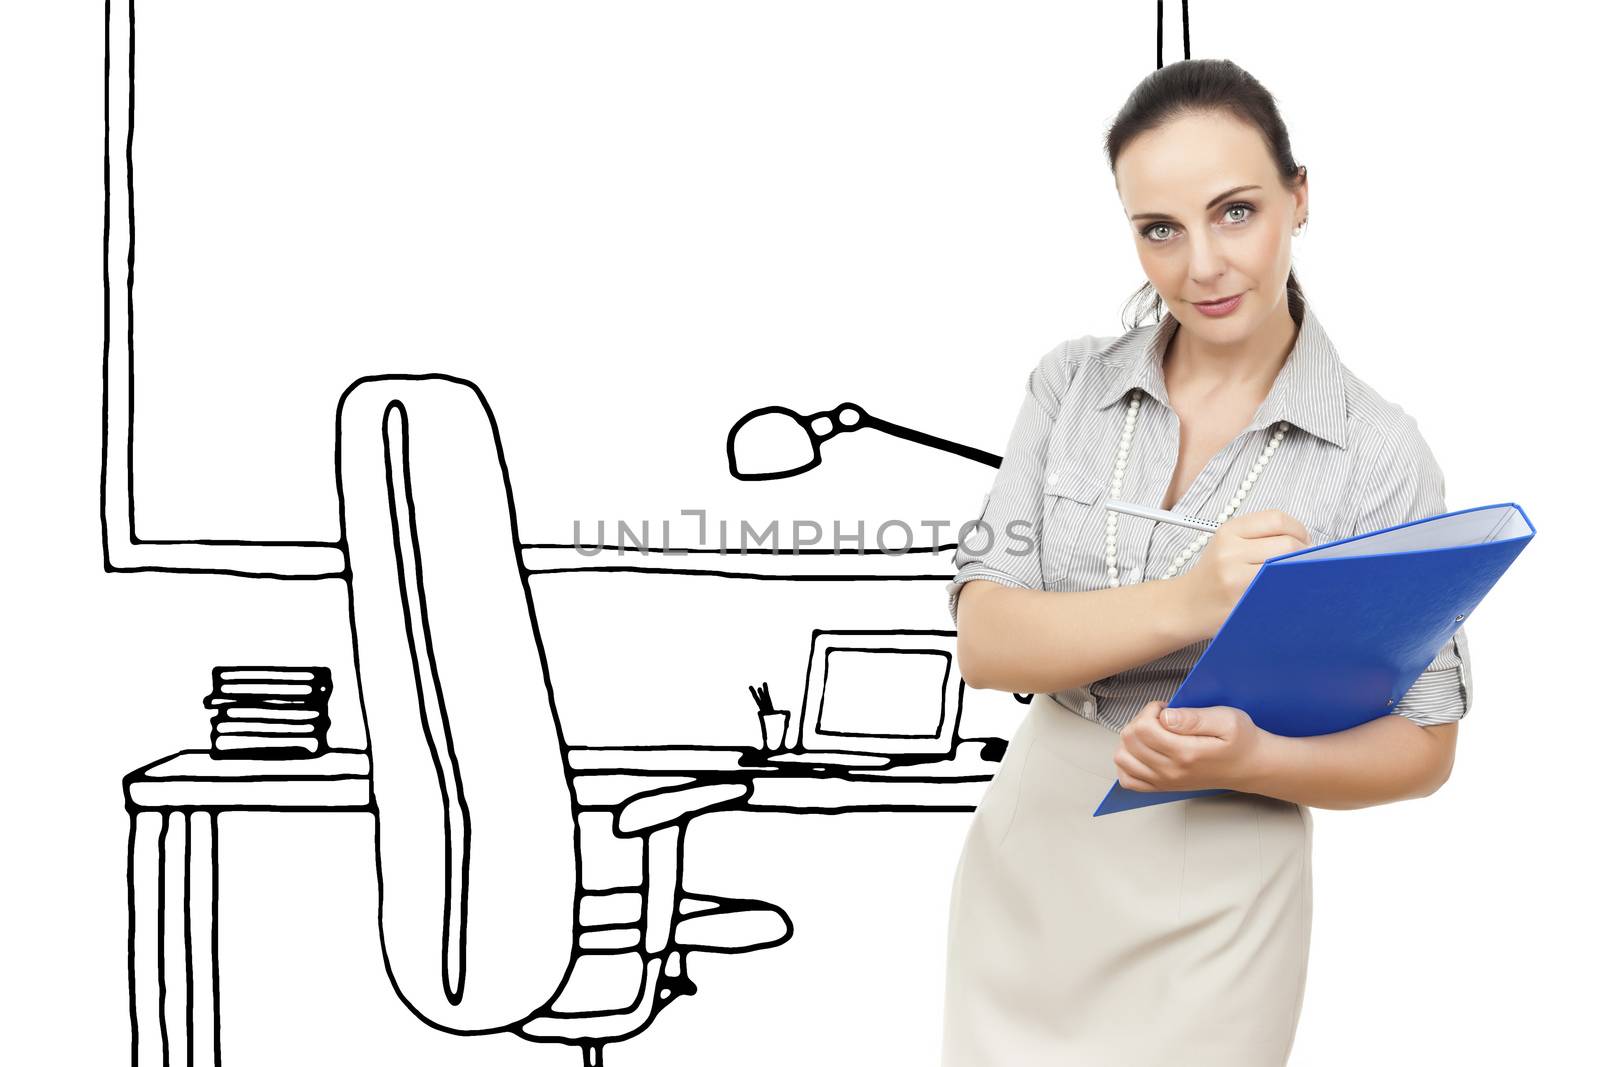 An image of a business woman in a office sketch